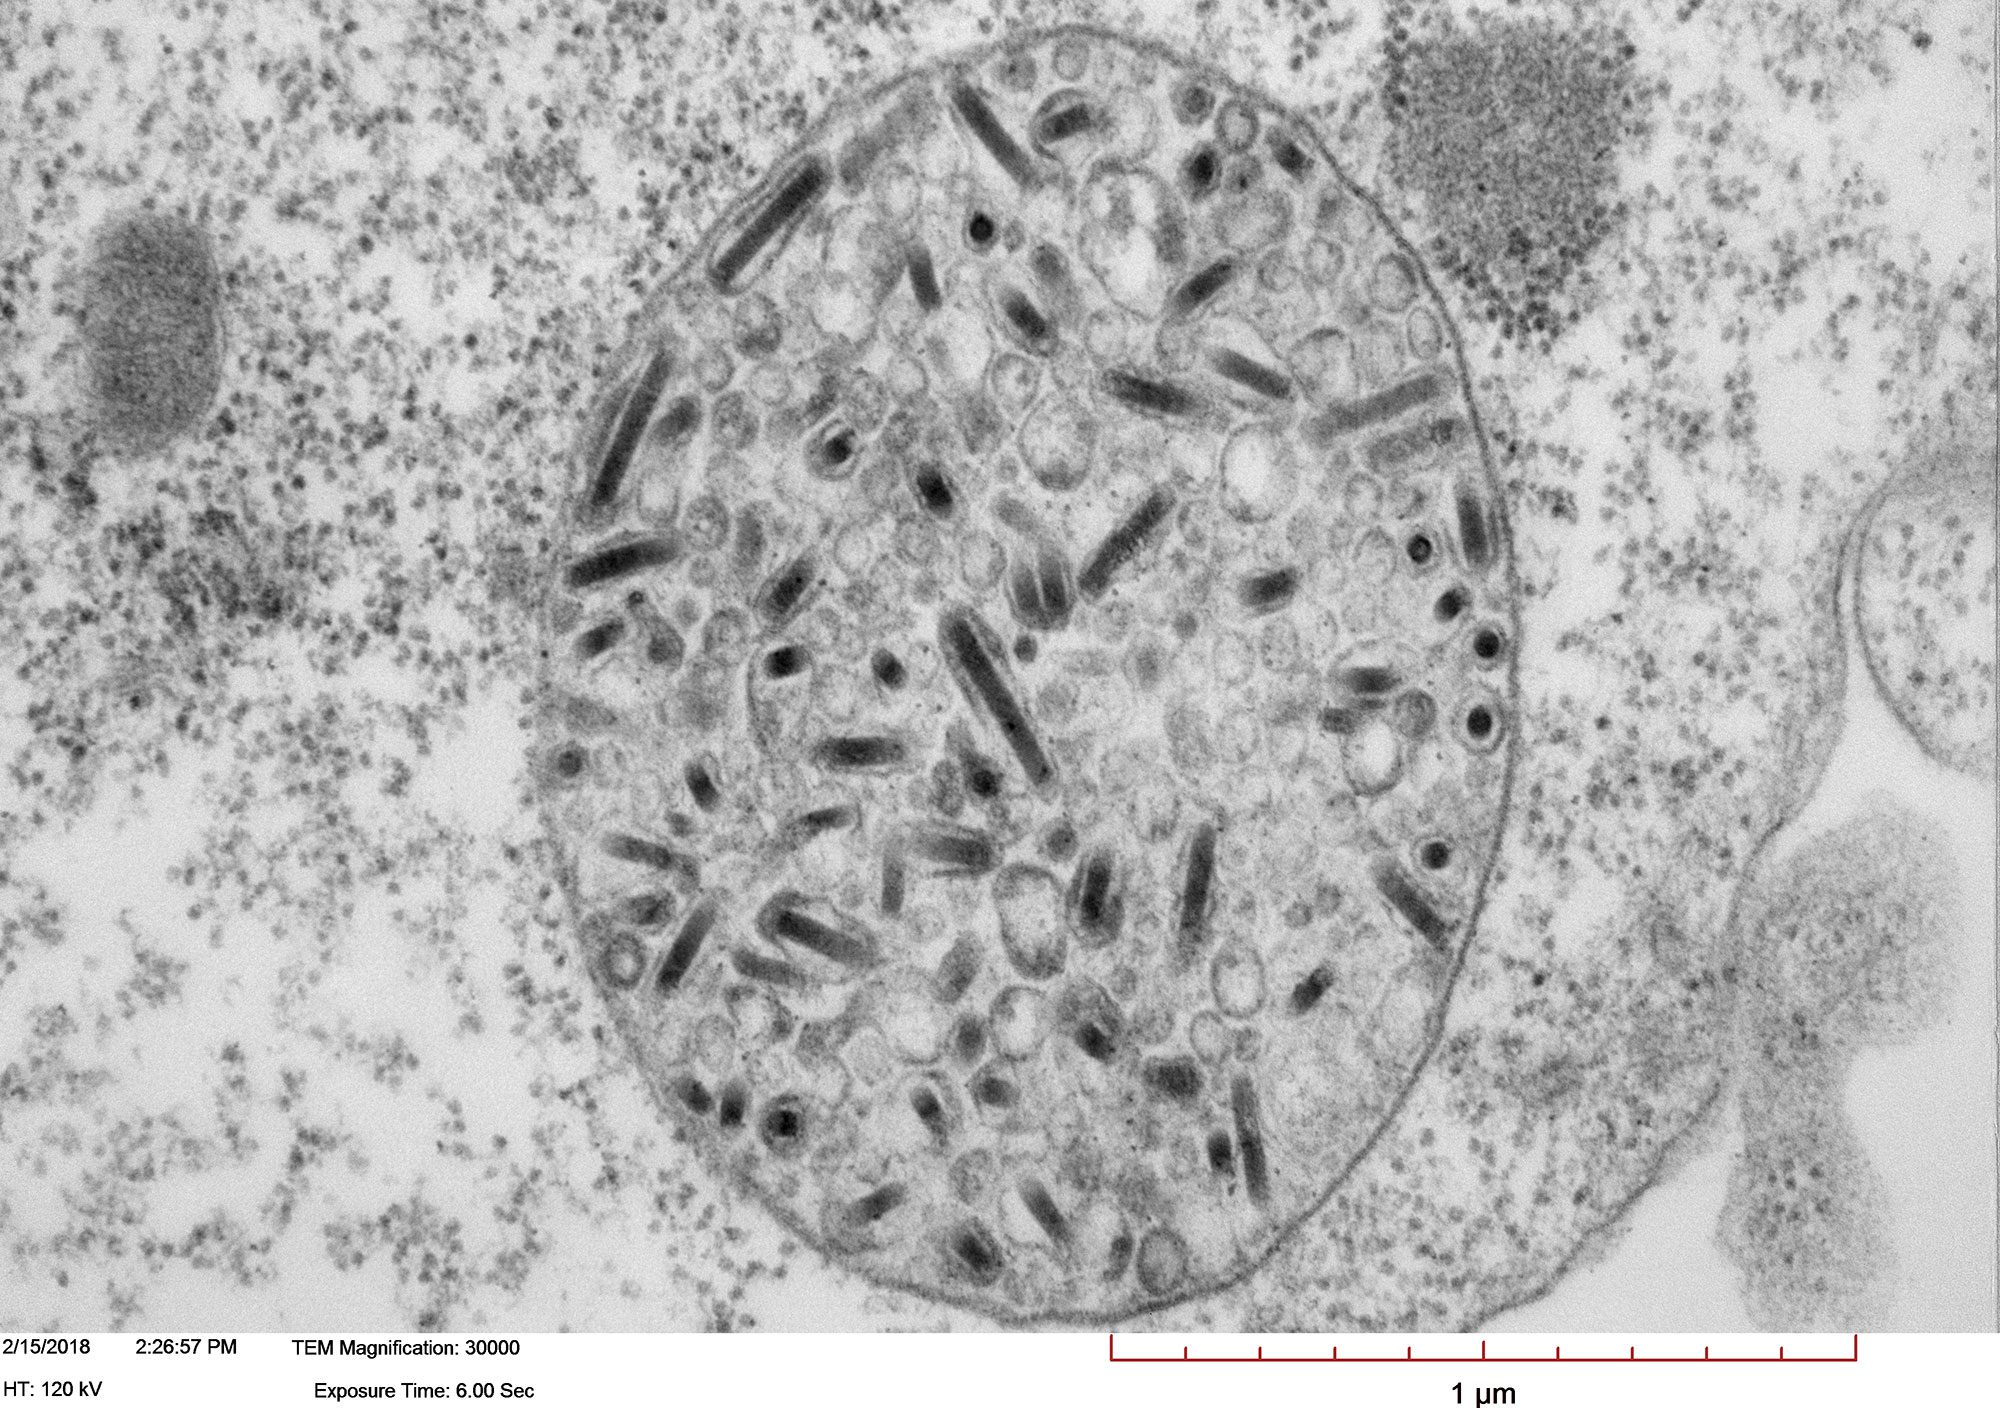 Transmission electron micrograph of High Five cells infected with Autographa californica multiple nucleopolyhedrovirus (AcMNPV). Image shows a large vesicle containing more than one enveloped nucleocapsid. Courtesy of Xiao-Wen Cheng, Miami University.